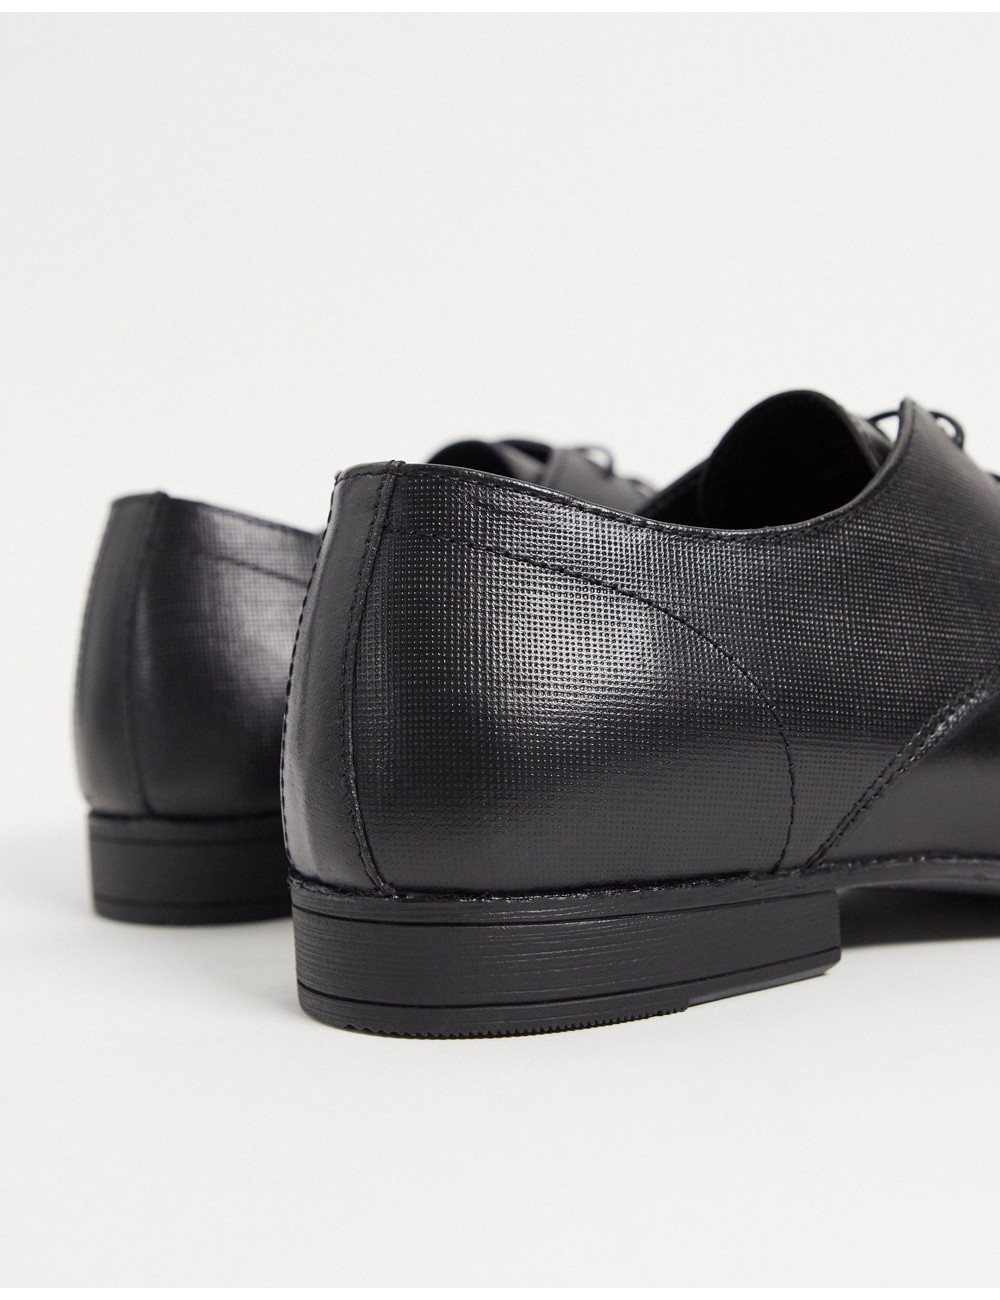 Topman leather derby shoes...